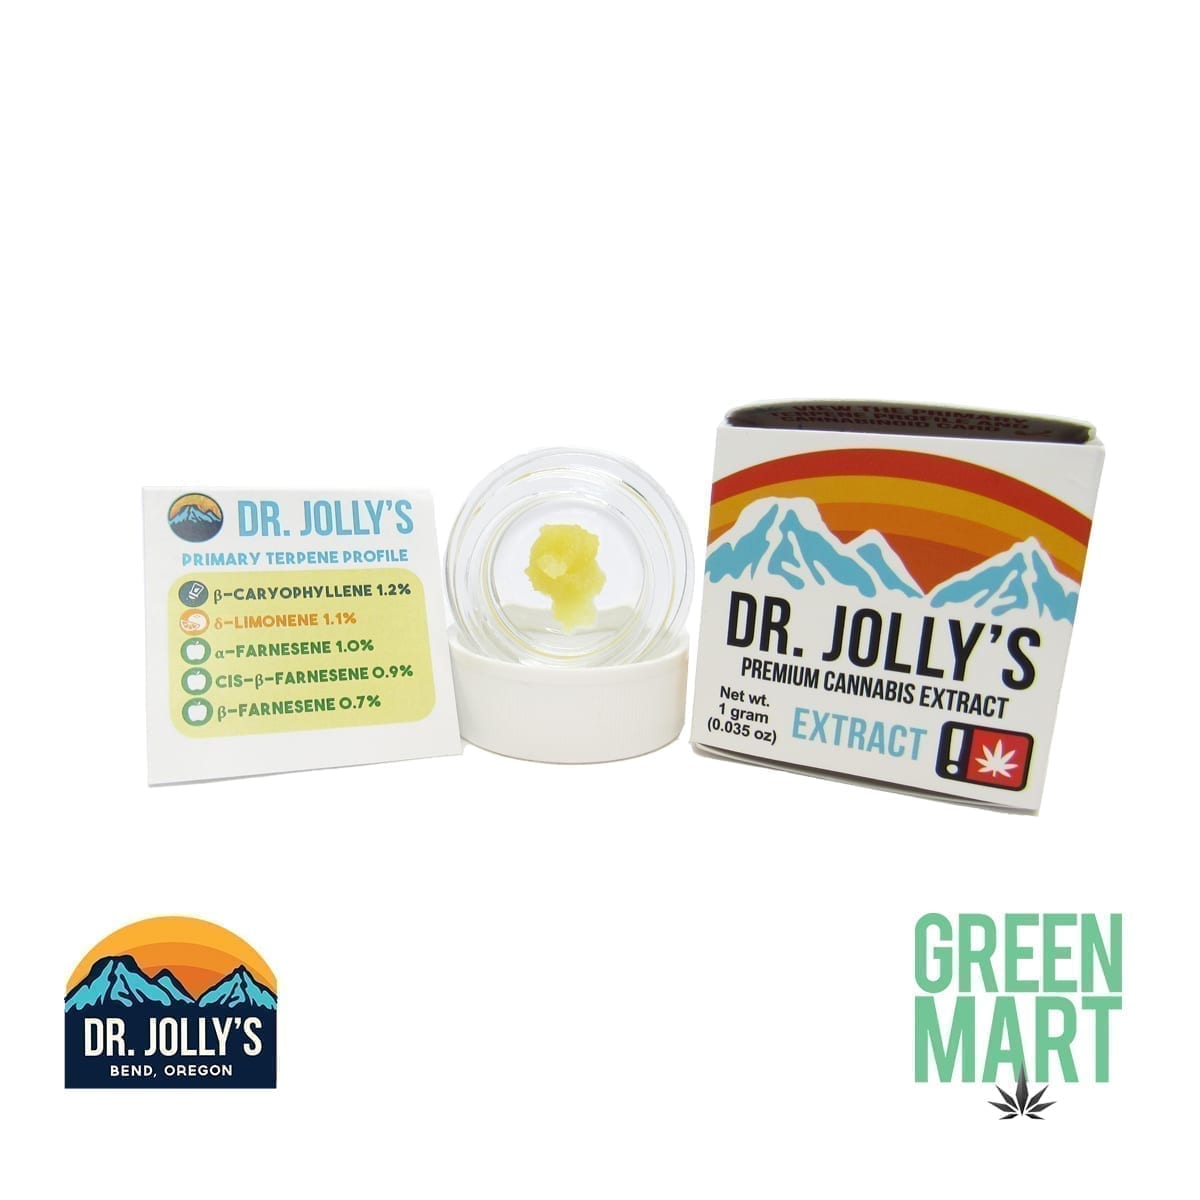 Dr. Jolly's Extracts - Platinum Punch